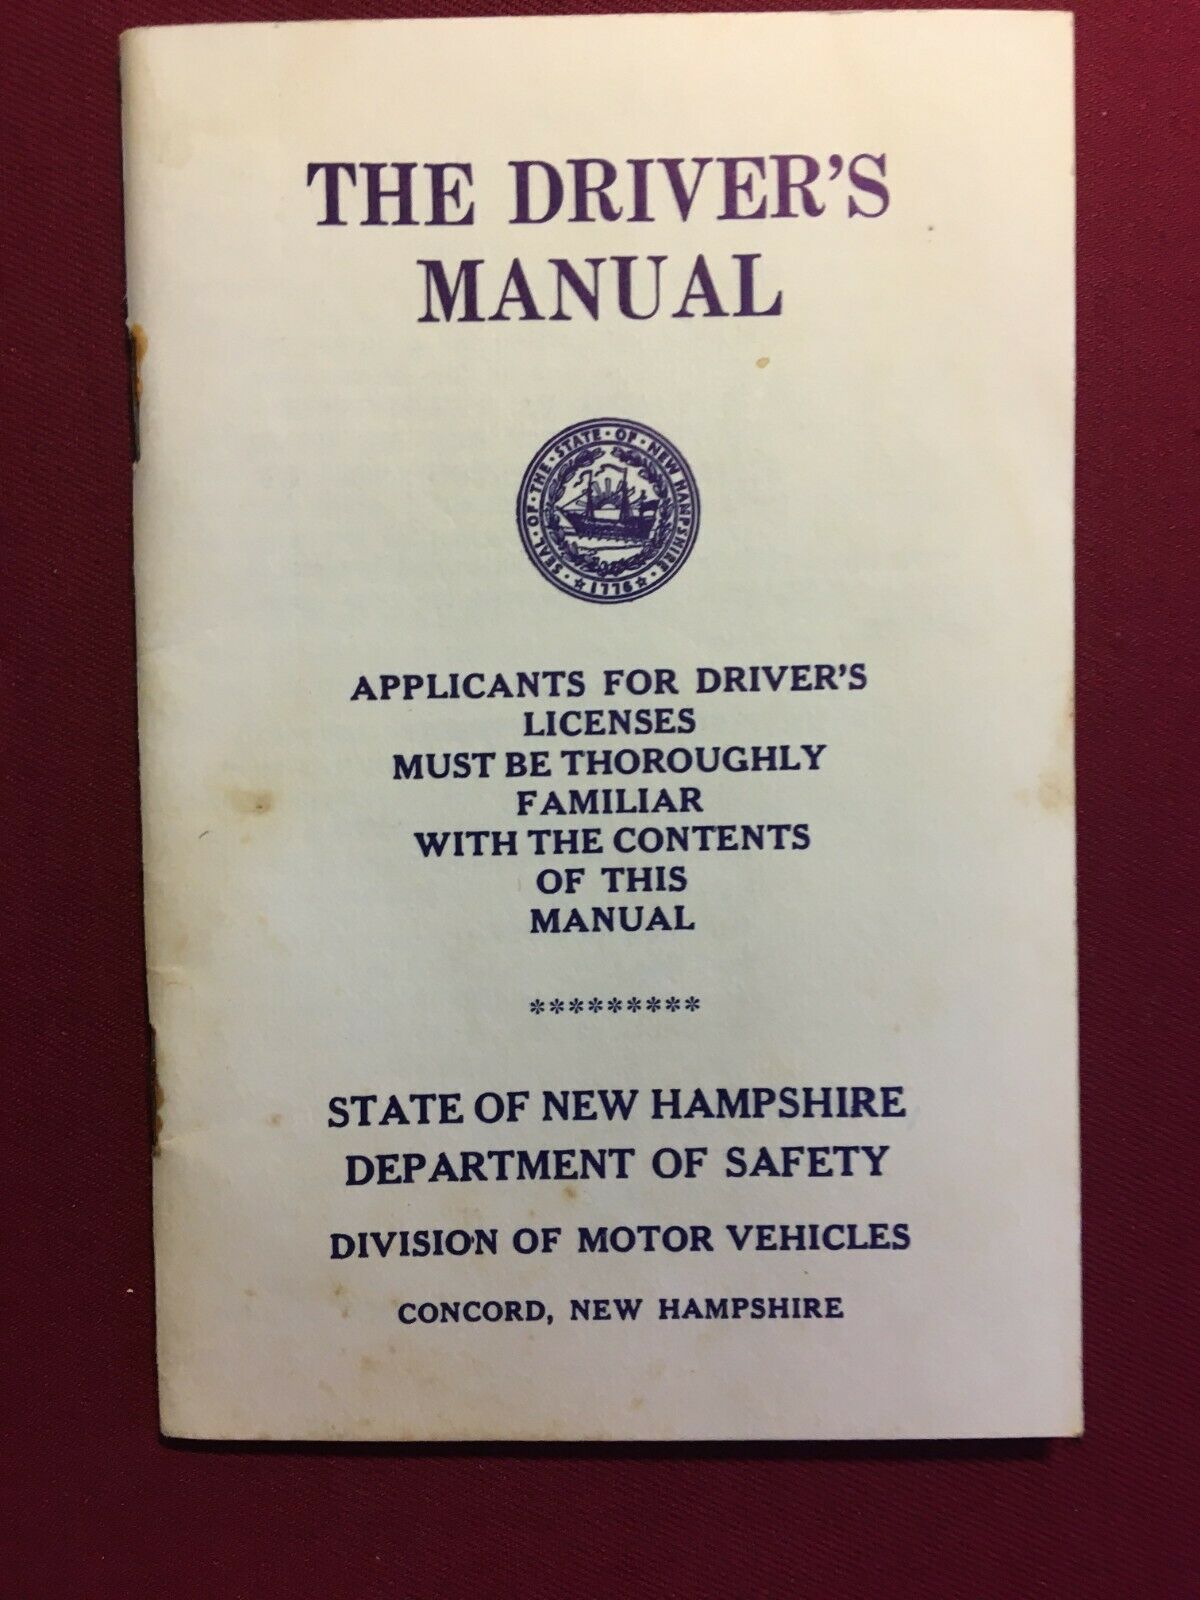 Vintage 1950's Drivers Manual For State Of New Hampshire